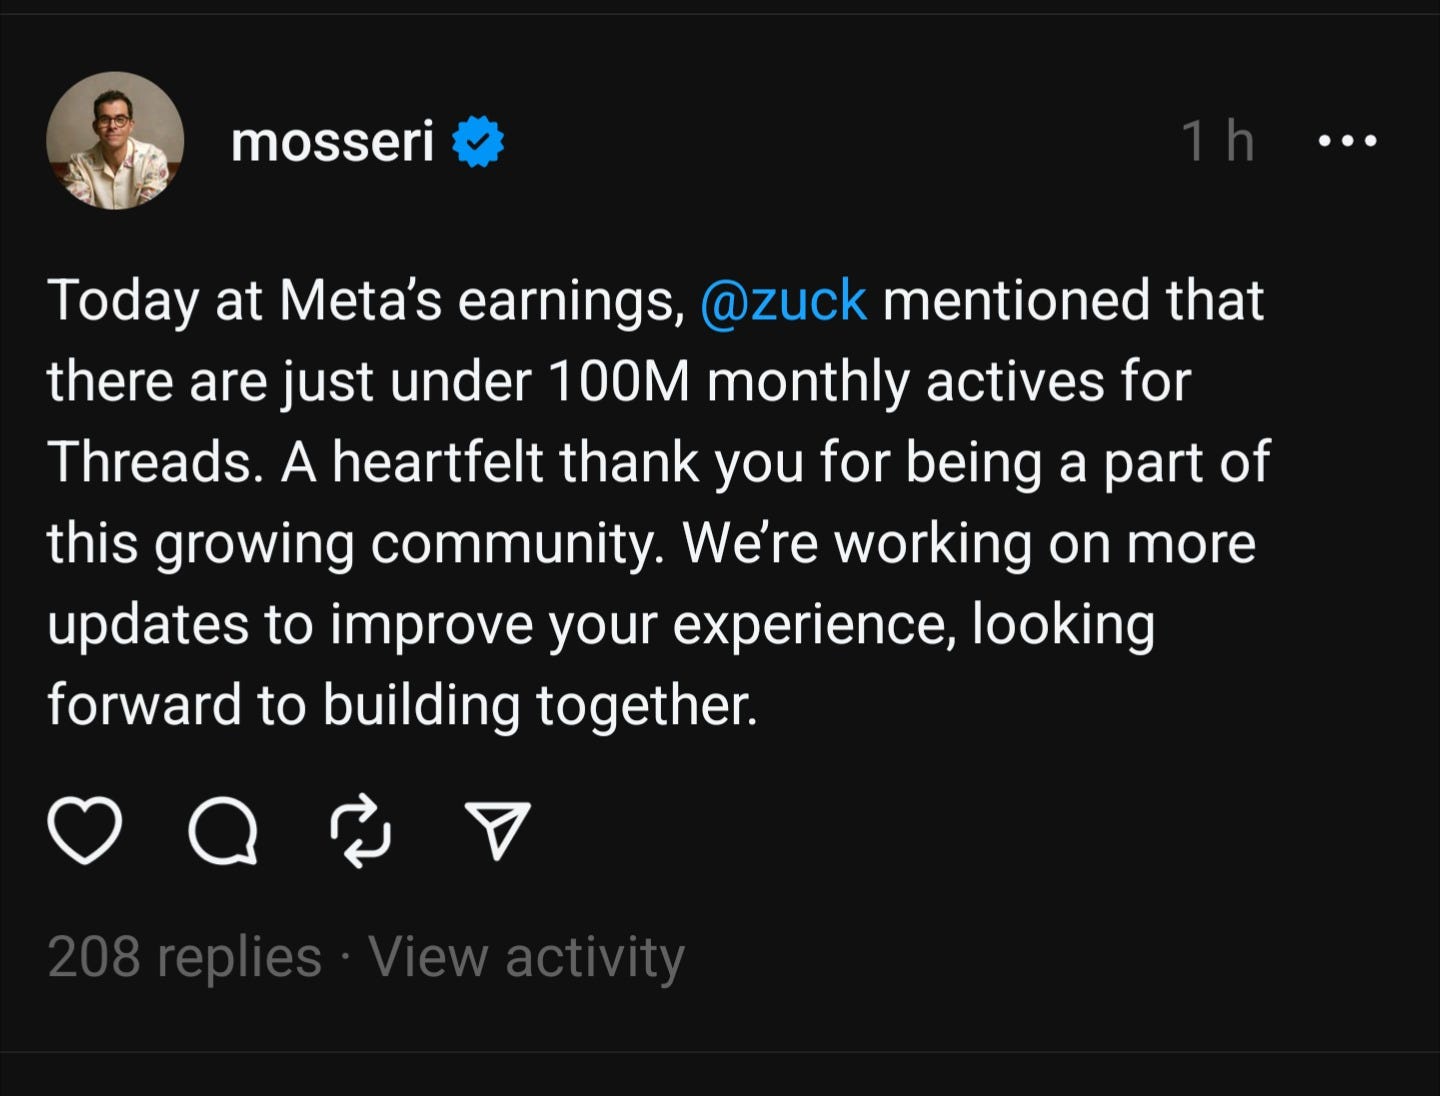 May be an image of 1 person and text that says 'mosseri Today at Meta's earnings, @zuck mentioned that there are just under 100M monthly actives for Threads A heartfelt thank you for being a part of this growing community. We're working on more updates to improve your experience, looking forward to building together.'